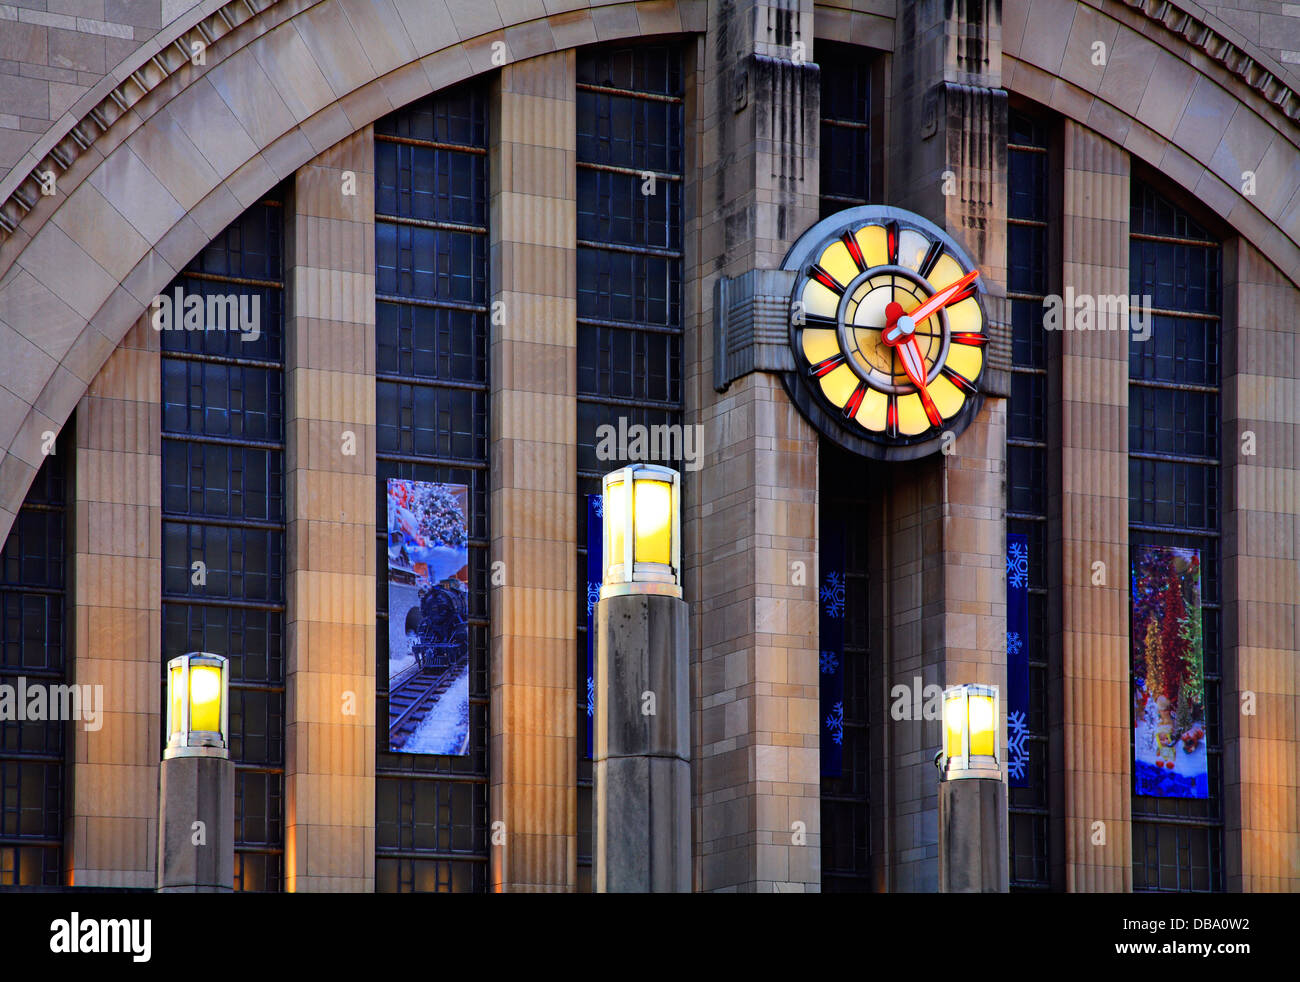 A Building Facade And Clock With It’s Outside Lights Beginning to Come On, Cincinnati Ohio USA Stock Photo